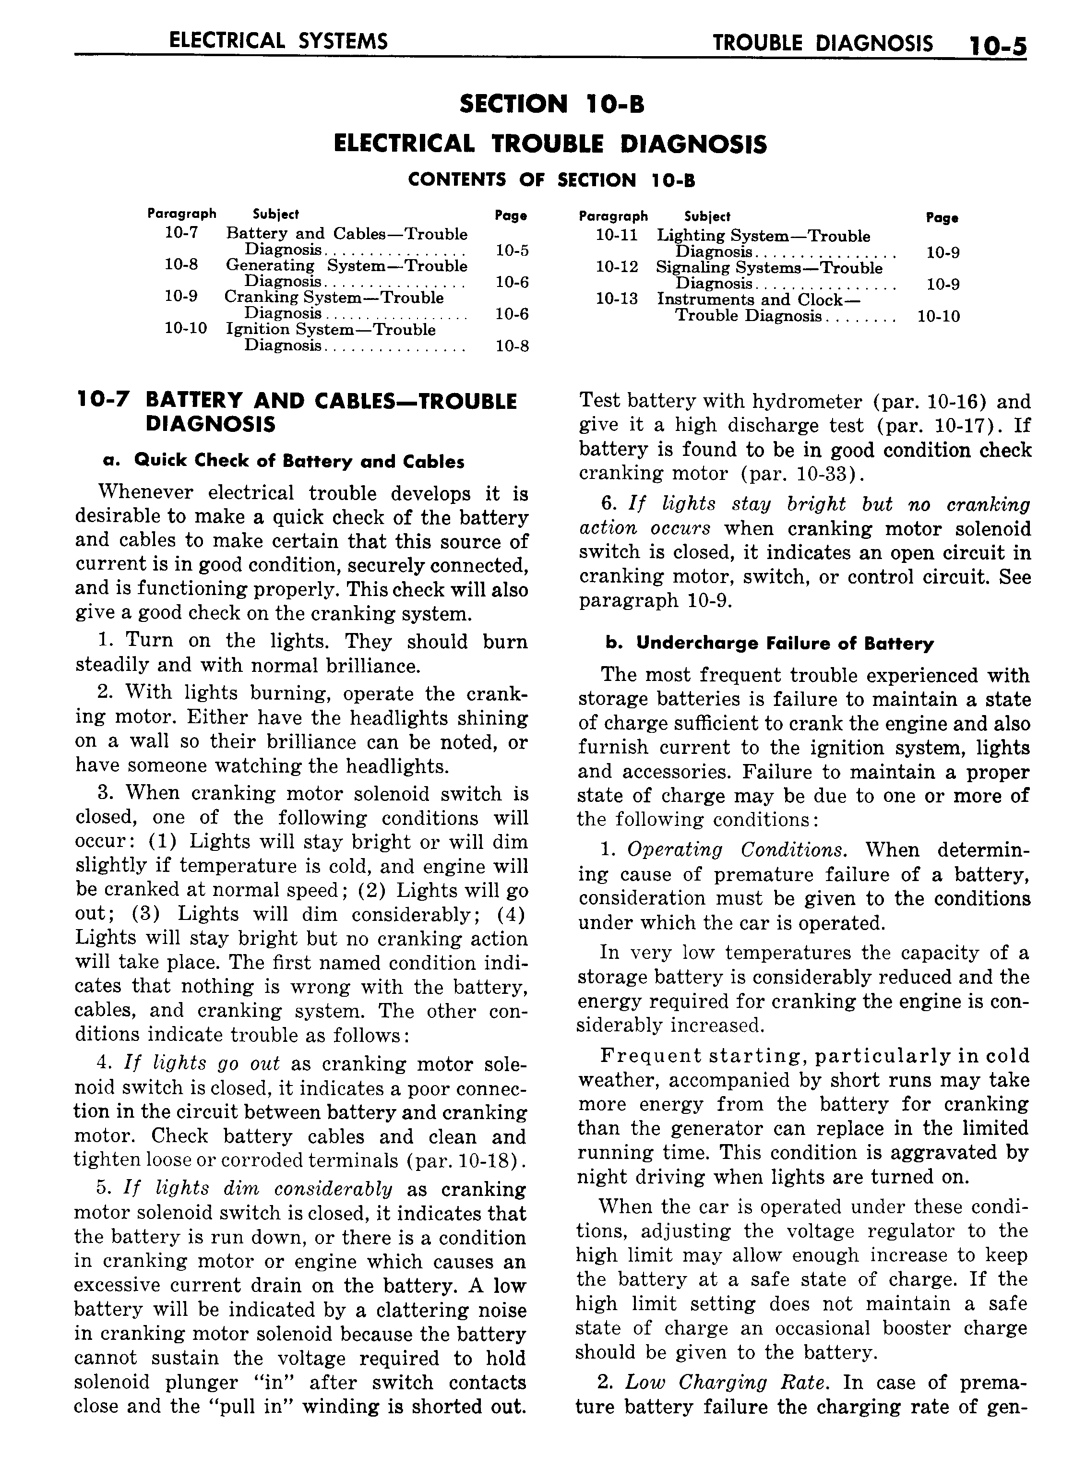 n_11 1957 Buick Shop Manual - Electrical Systems-005-005.jpg